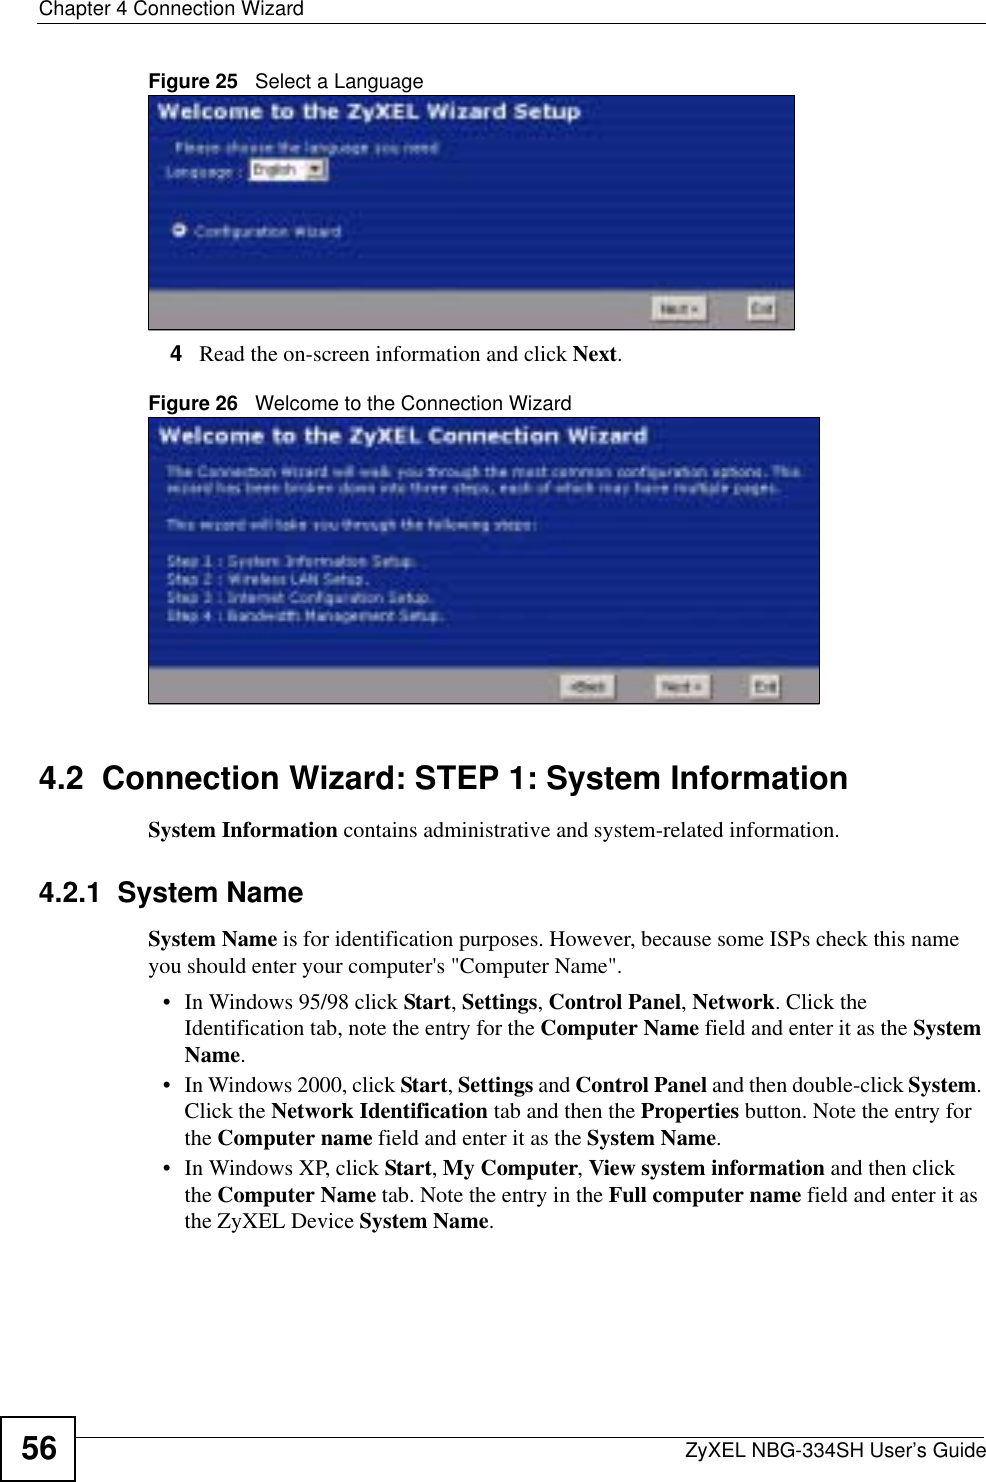 Chapter 4 Connection WizardZyXEL NBG-334SH User’s Guide56Figure 25   Select a Language4Read the on-screen information and click Next.Figure 26   Welcome to the Connection Wizard4.2  Connection Wizard: STEP 1: System InformationSystem Information contains administrative and system-related information.4.2.1  System NameSystem Name is for identification purposes. However, because some ISPs check this name you should enter your computer&apos;s &quot;Computer Name&quot;. • In Windows 95/98 click Start, Settings, Control Panel, Network. Click the Identification tab, note the entry for the Computer Name field and enter it as the SystemName.• In Windows 2000, click Start, Settings and Control Panel and then double-click System.Click the Network Identification tab and then the Properties button. Note the entry for the Computer name field and enter it as the System Name.• In Windows XP, click Start, My Computer, View system information and then click the Computer Name tab. Note the entry in the Full computer name field and enter it as the ZyXEL Device System Name.